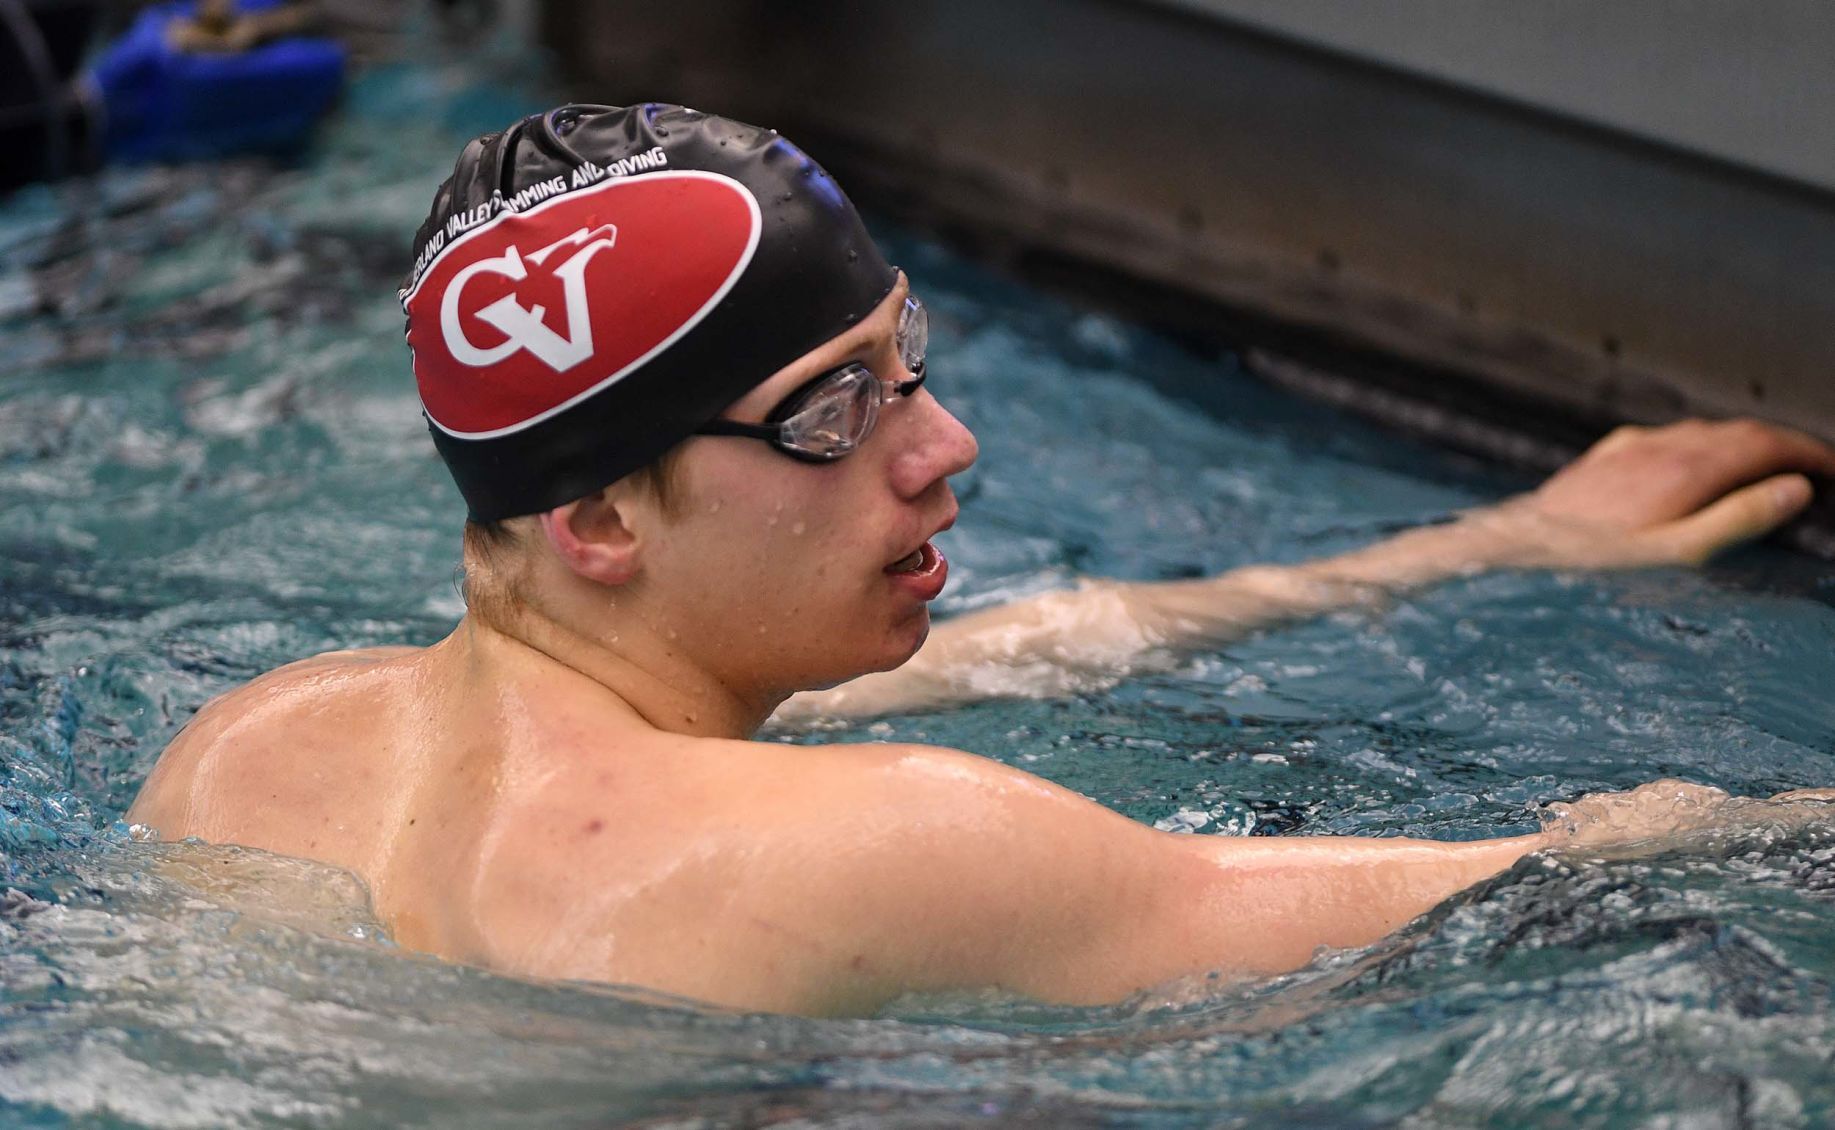 2020-21 HS Boys Swimming Previews Swimmers, divers to watch and key returning athletes for each team in Cumberland County